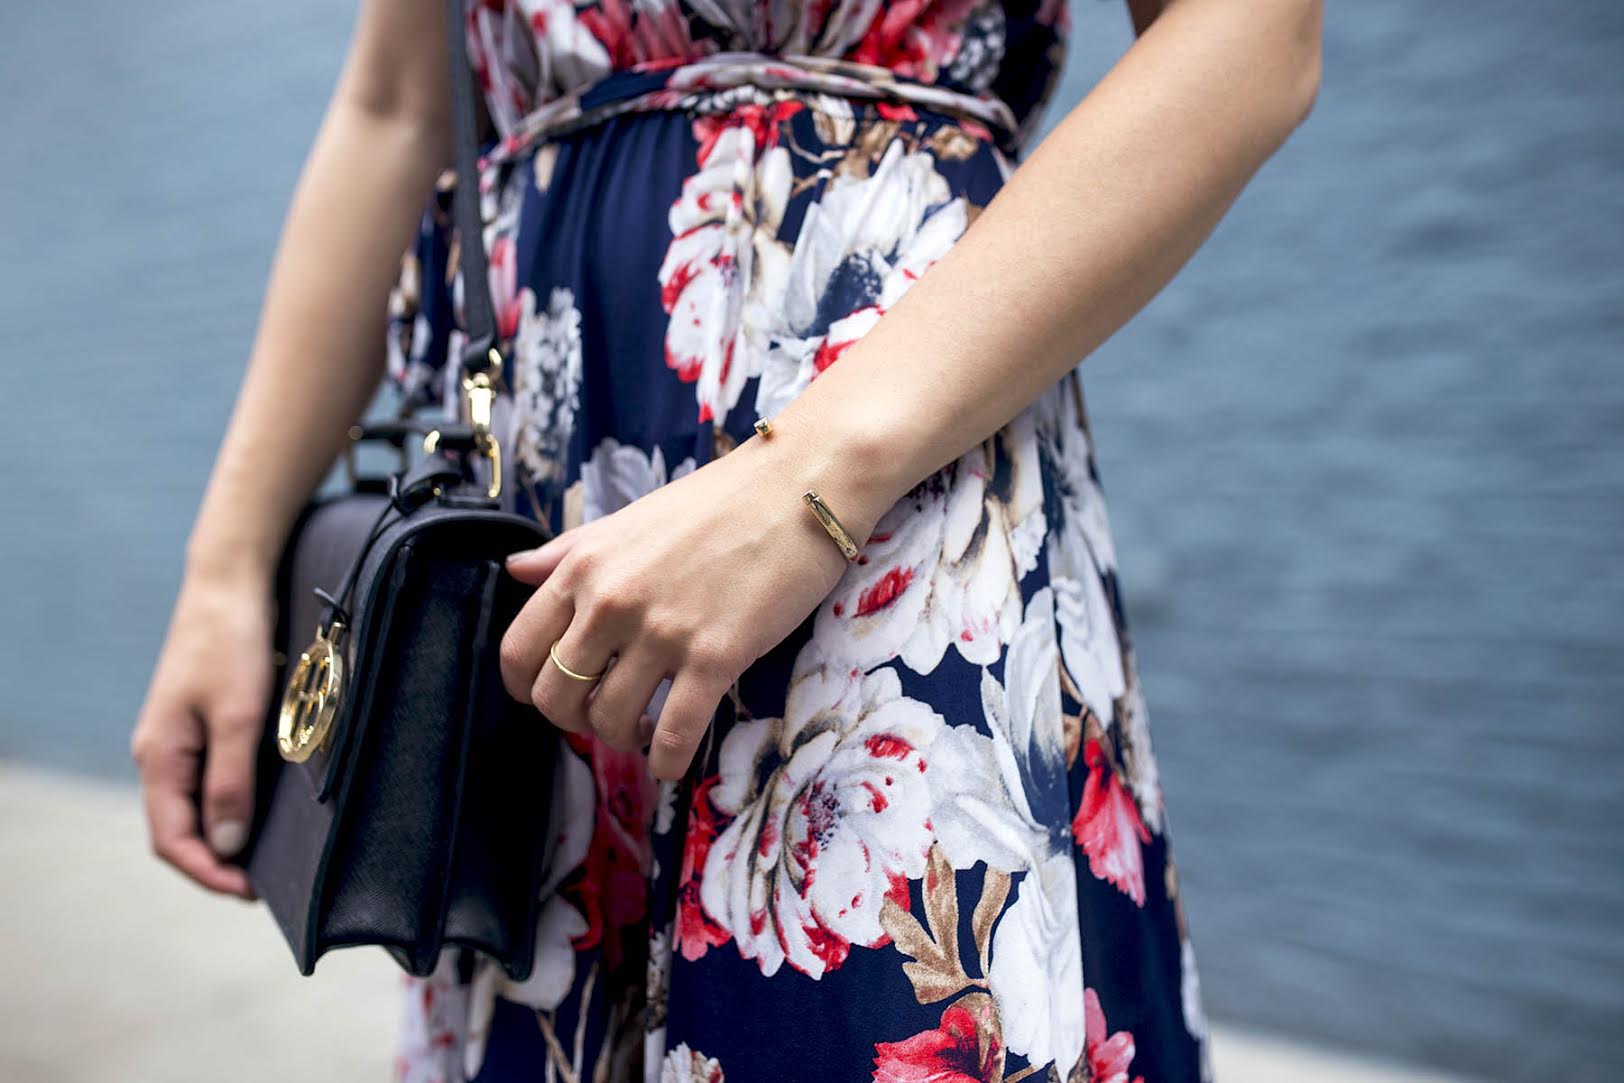 Long Floral Wrap Dress West Kei Louboutins & Love Fashion Blog Esther Santer NYC Street Style Blogger Outfit OOTD Trendy Henri Bendel Amare Jewels Ivanka Trump Black Klover Sandals Floral Woman Chic Red Lip Pink Hair Brown Wavey Purple Dress .jpg